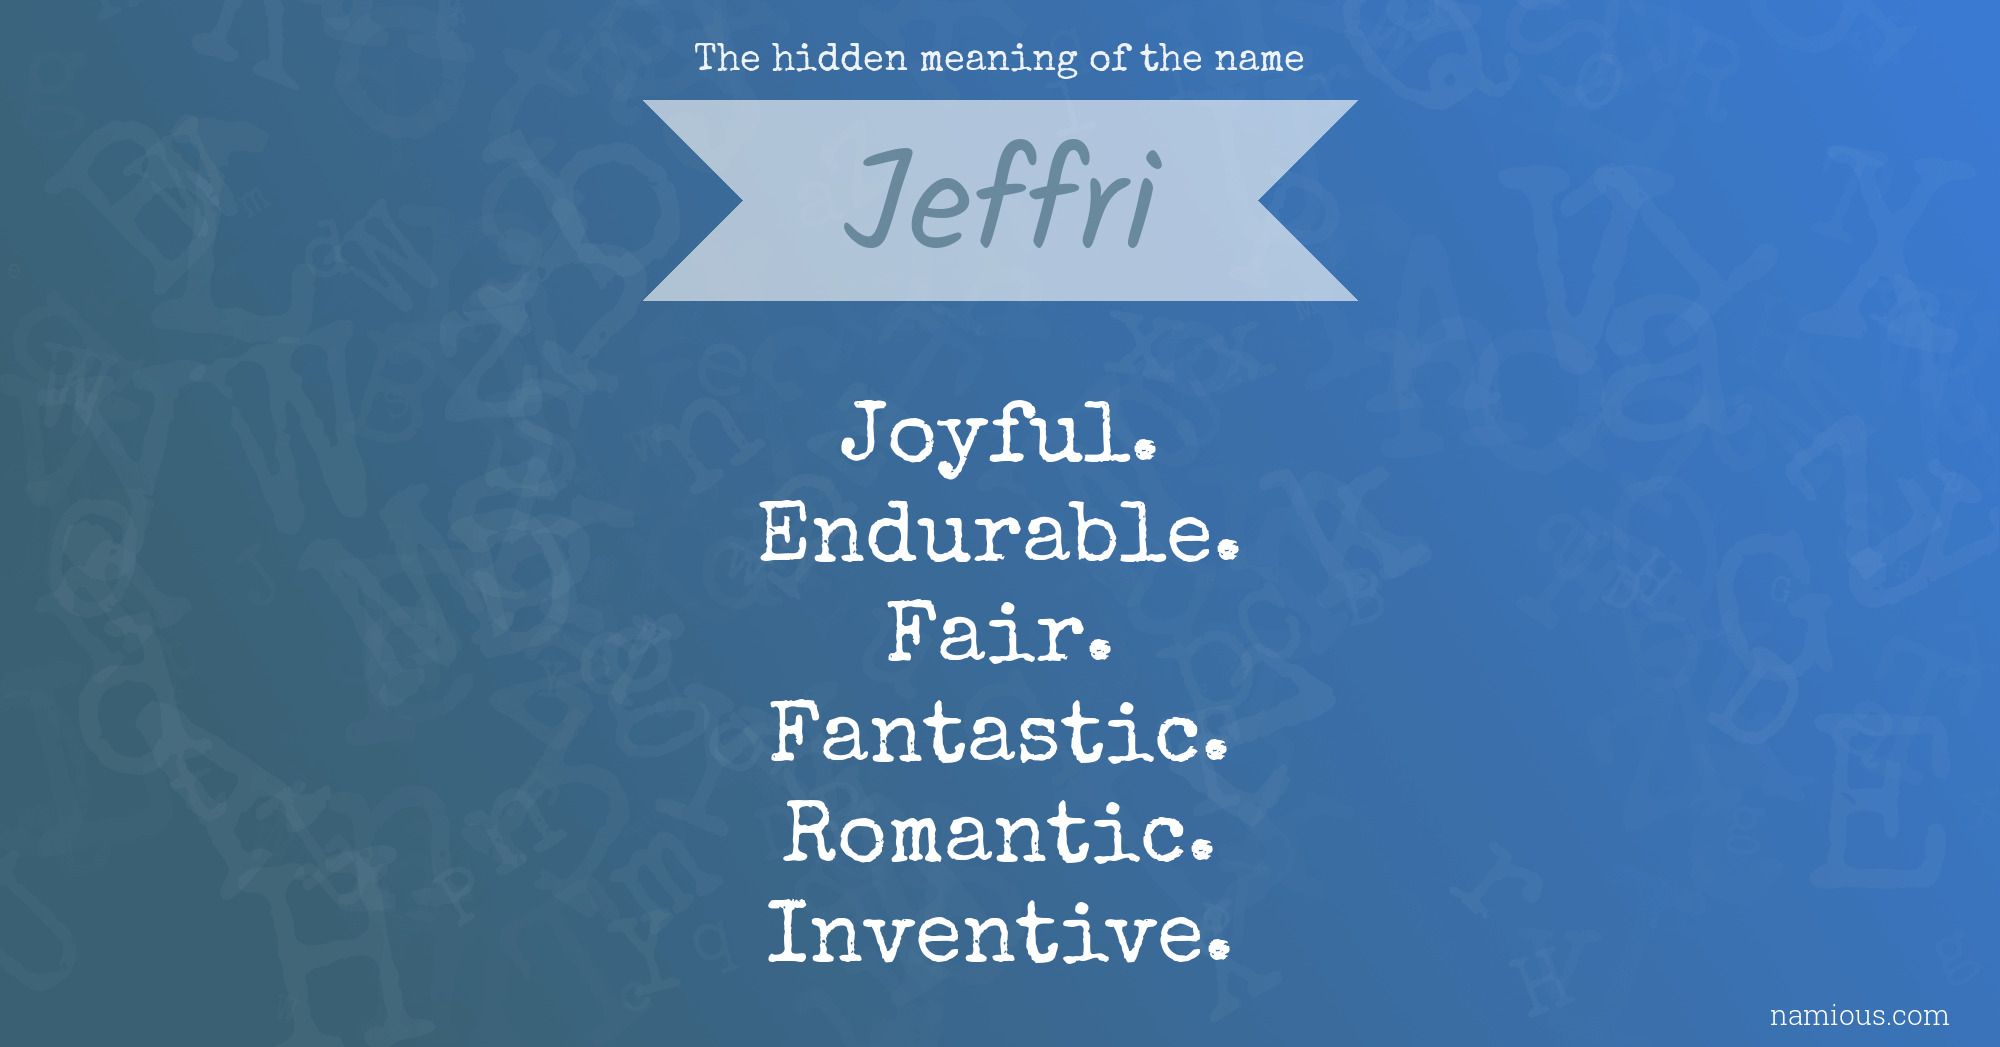 The hidden meaning of the name Jeffri